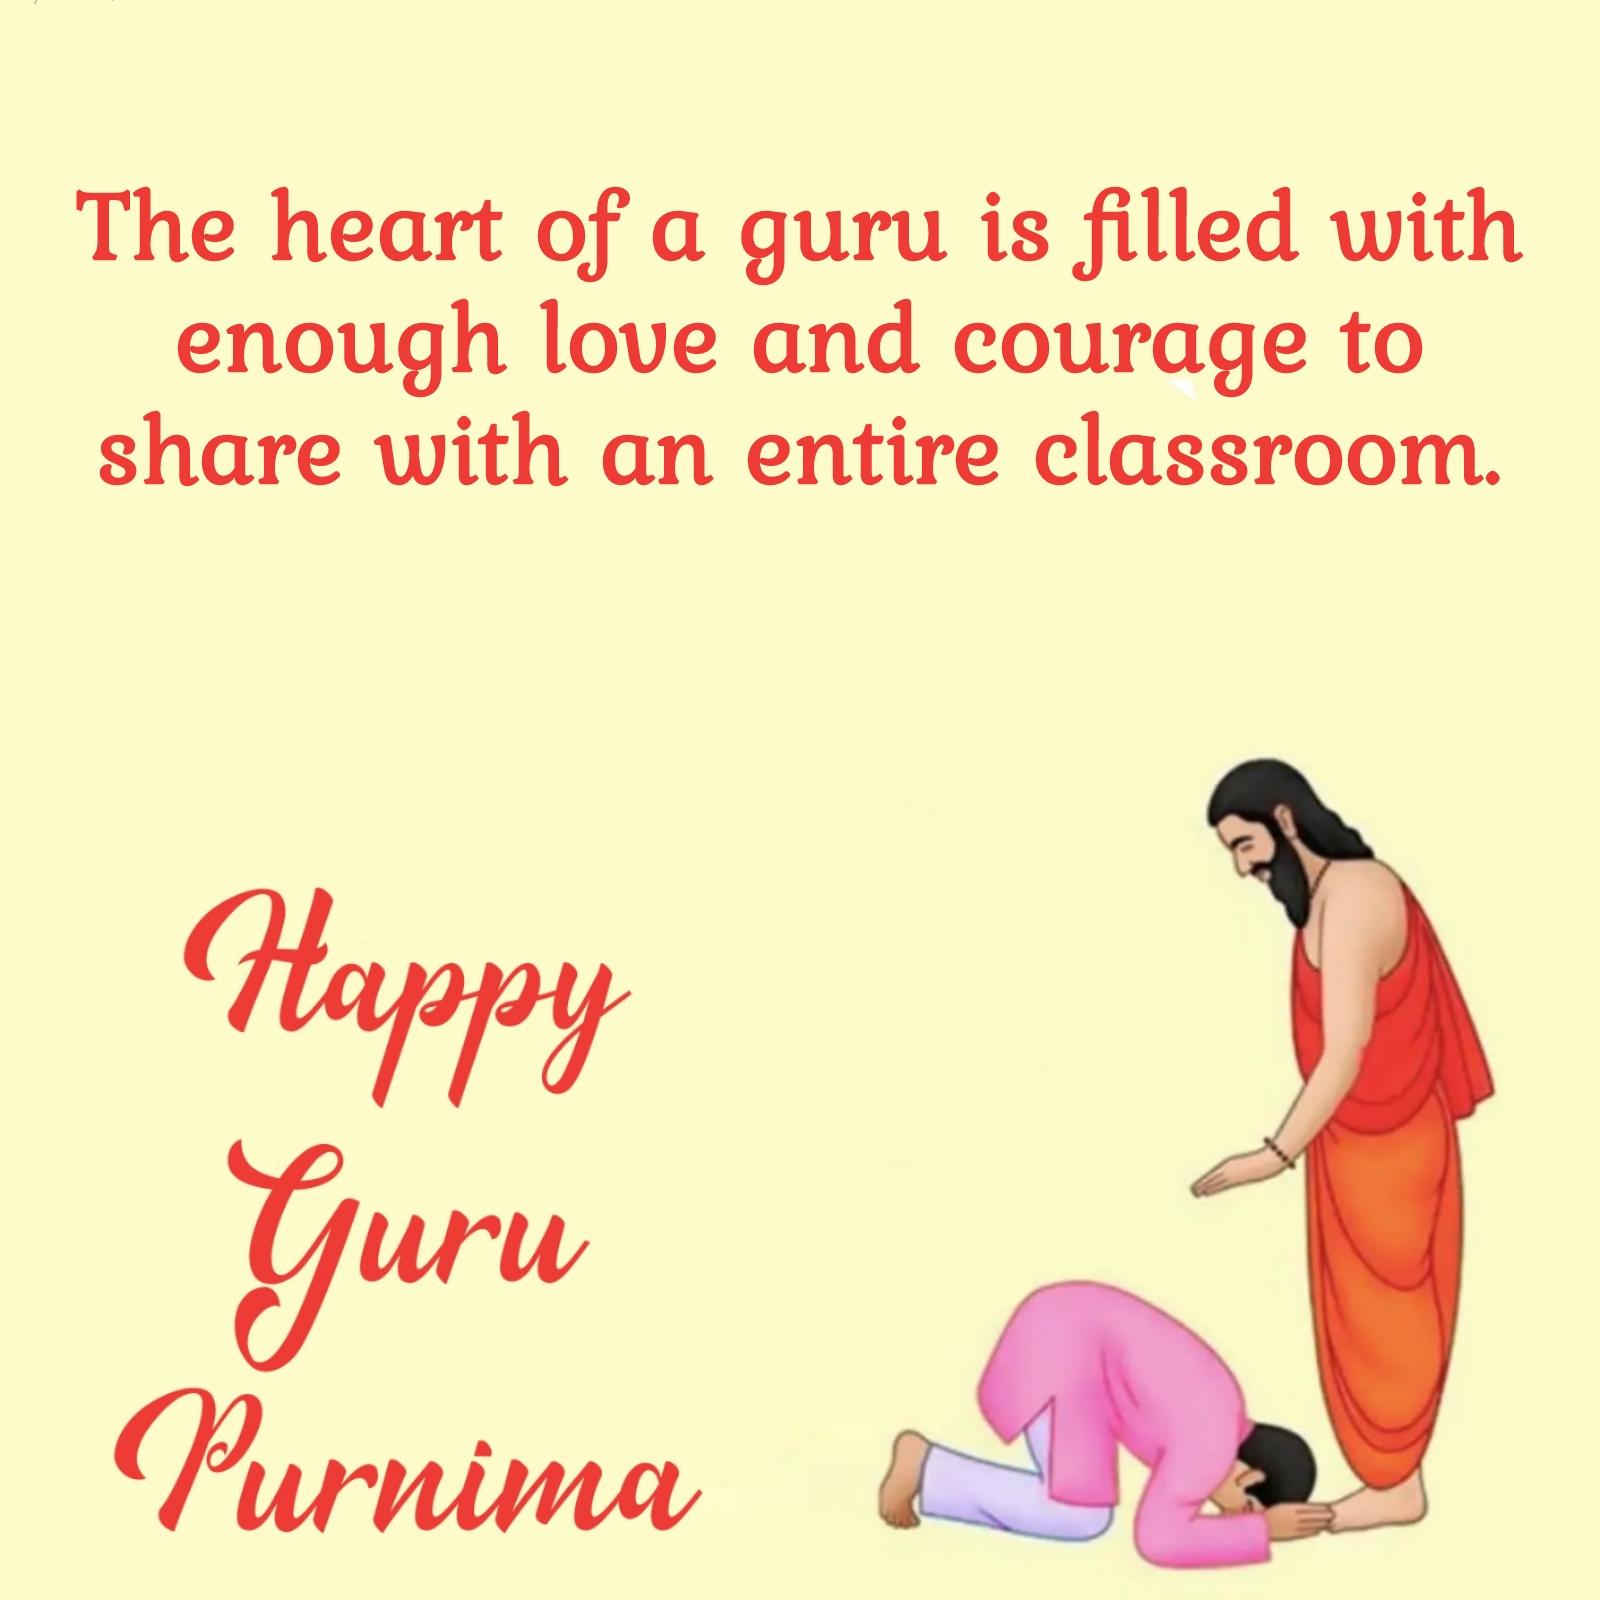 The heart of a guru is filled with enough love and courage